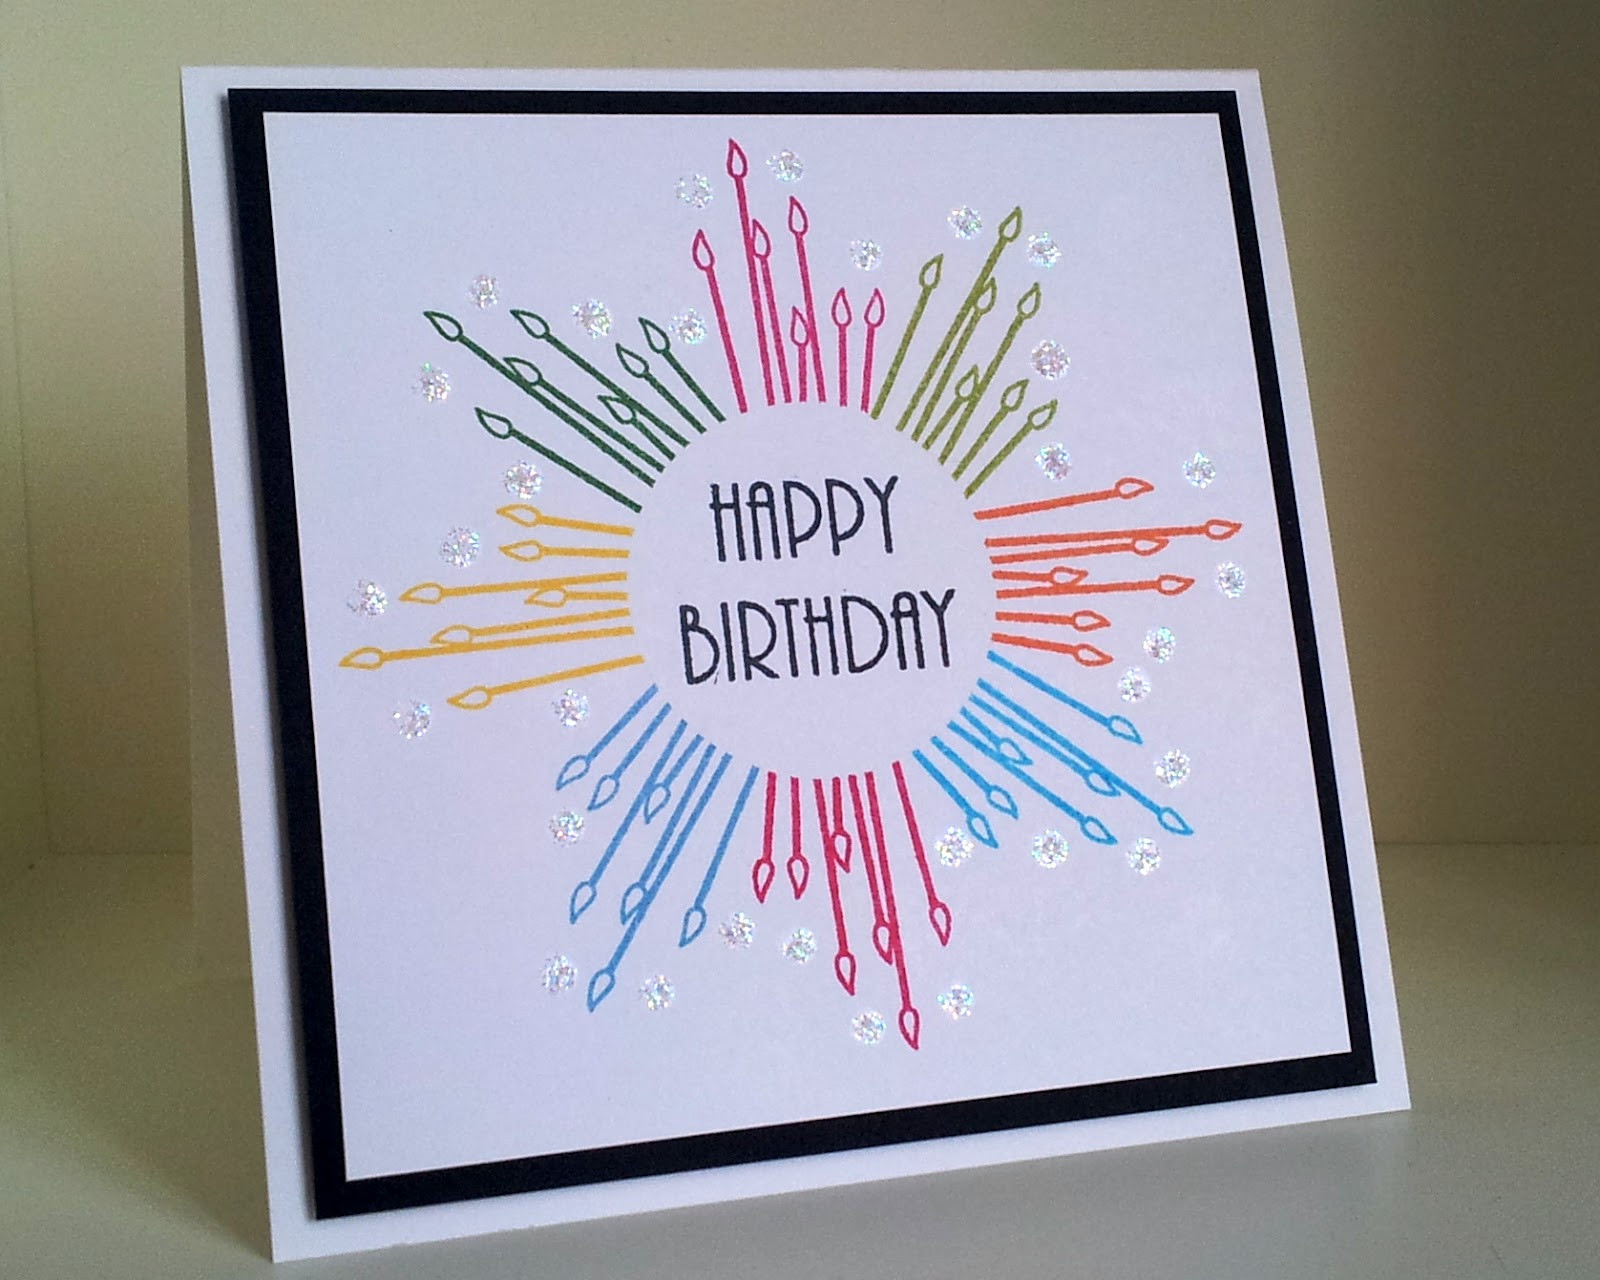 Ideas For Making Birthday Cards For Friends How To Make A Great Birthday Card Latest Good Ideas For Birthday